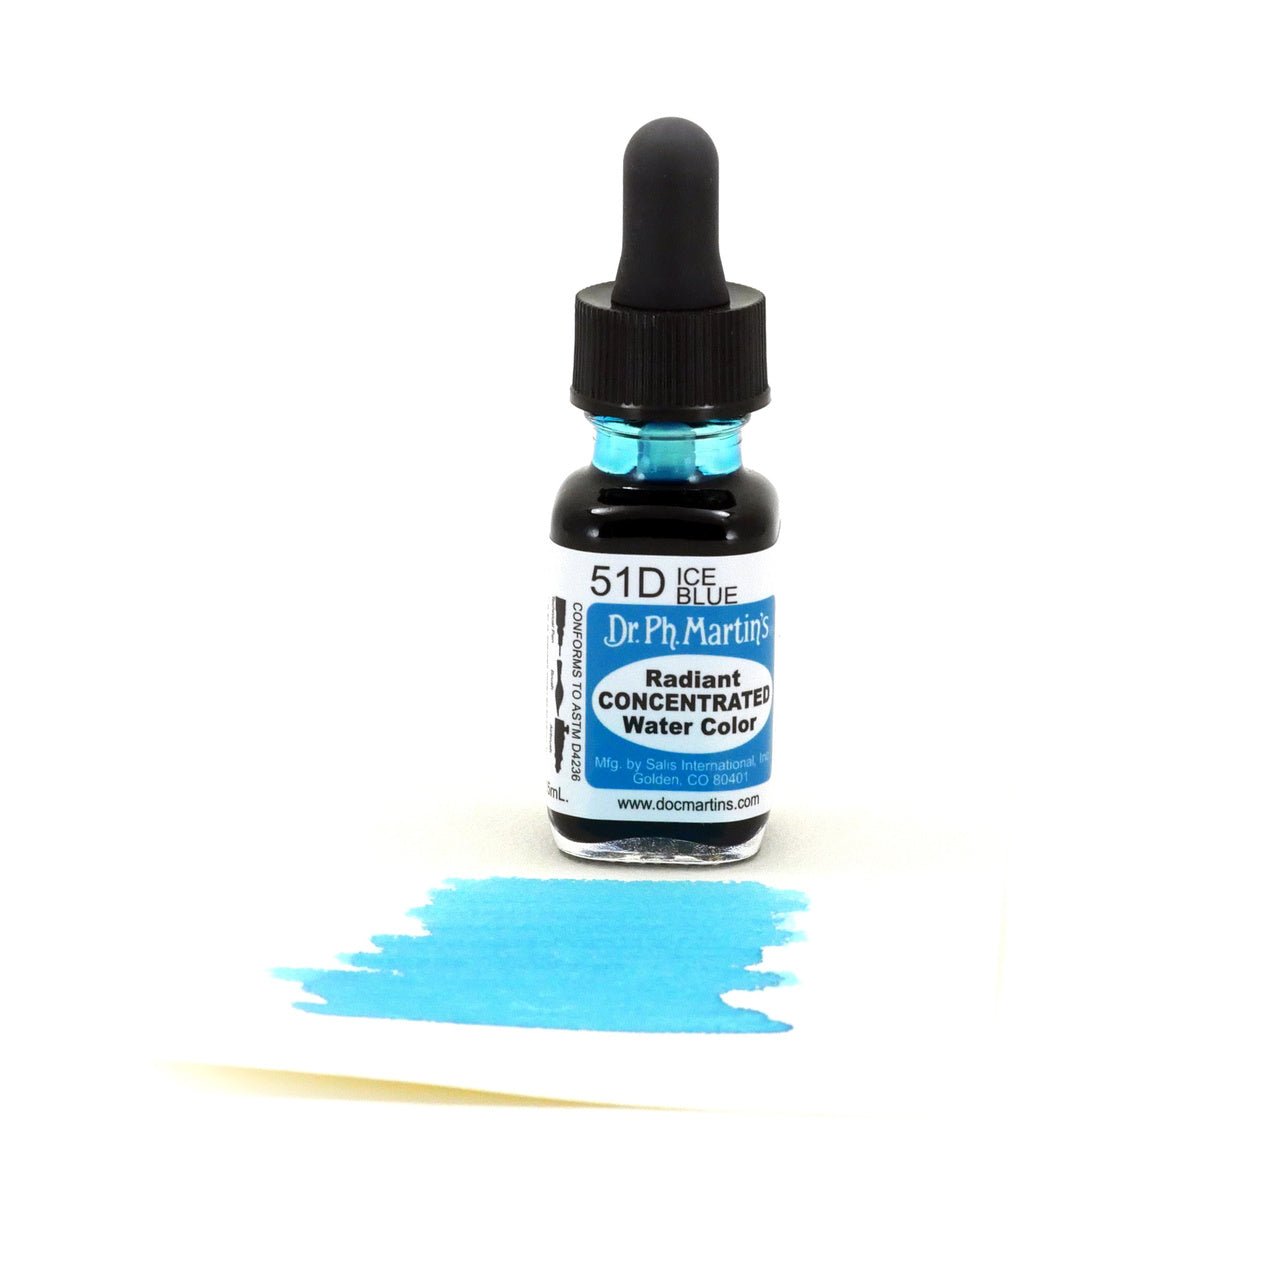 Dr. Ph. Martin's Radiant Watercolor .5 oz - Ice Blue - merriartist.com